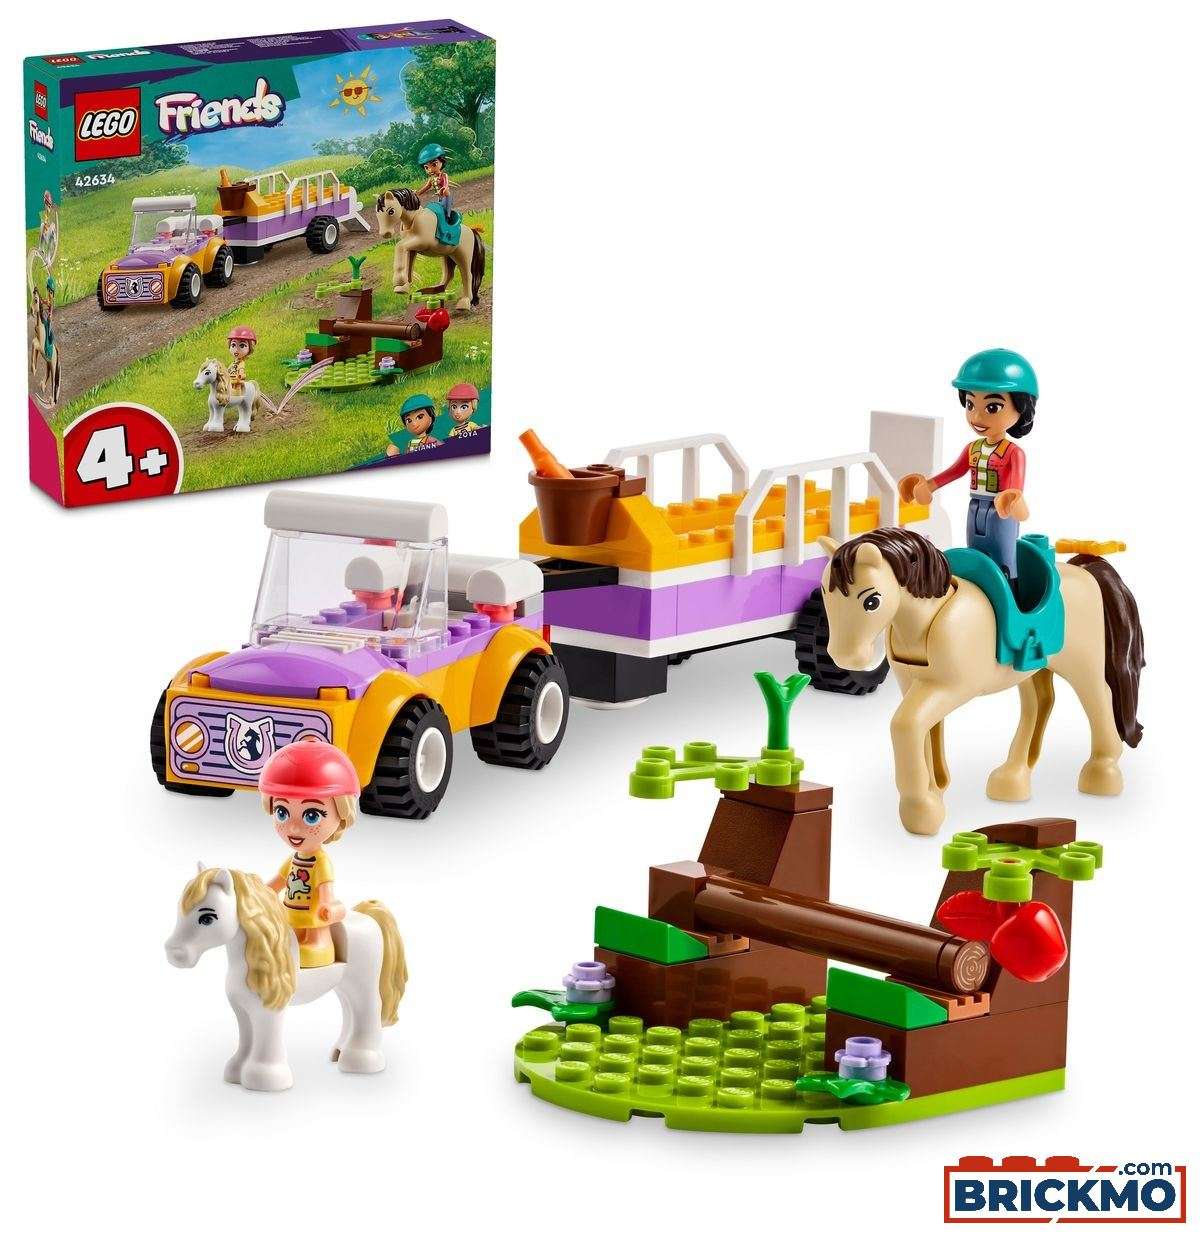 LEGO Friends 42634 Horse and Pony Trailer 42634